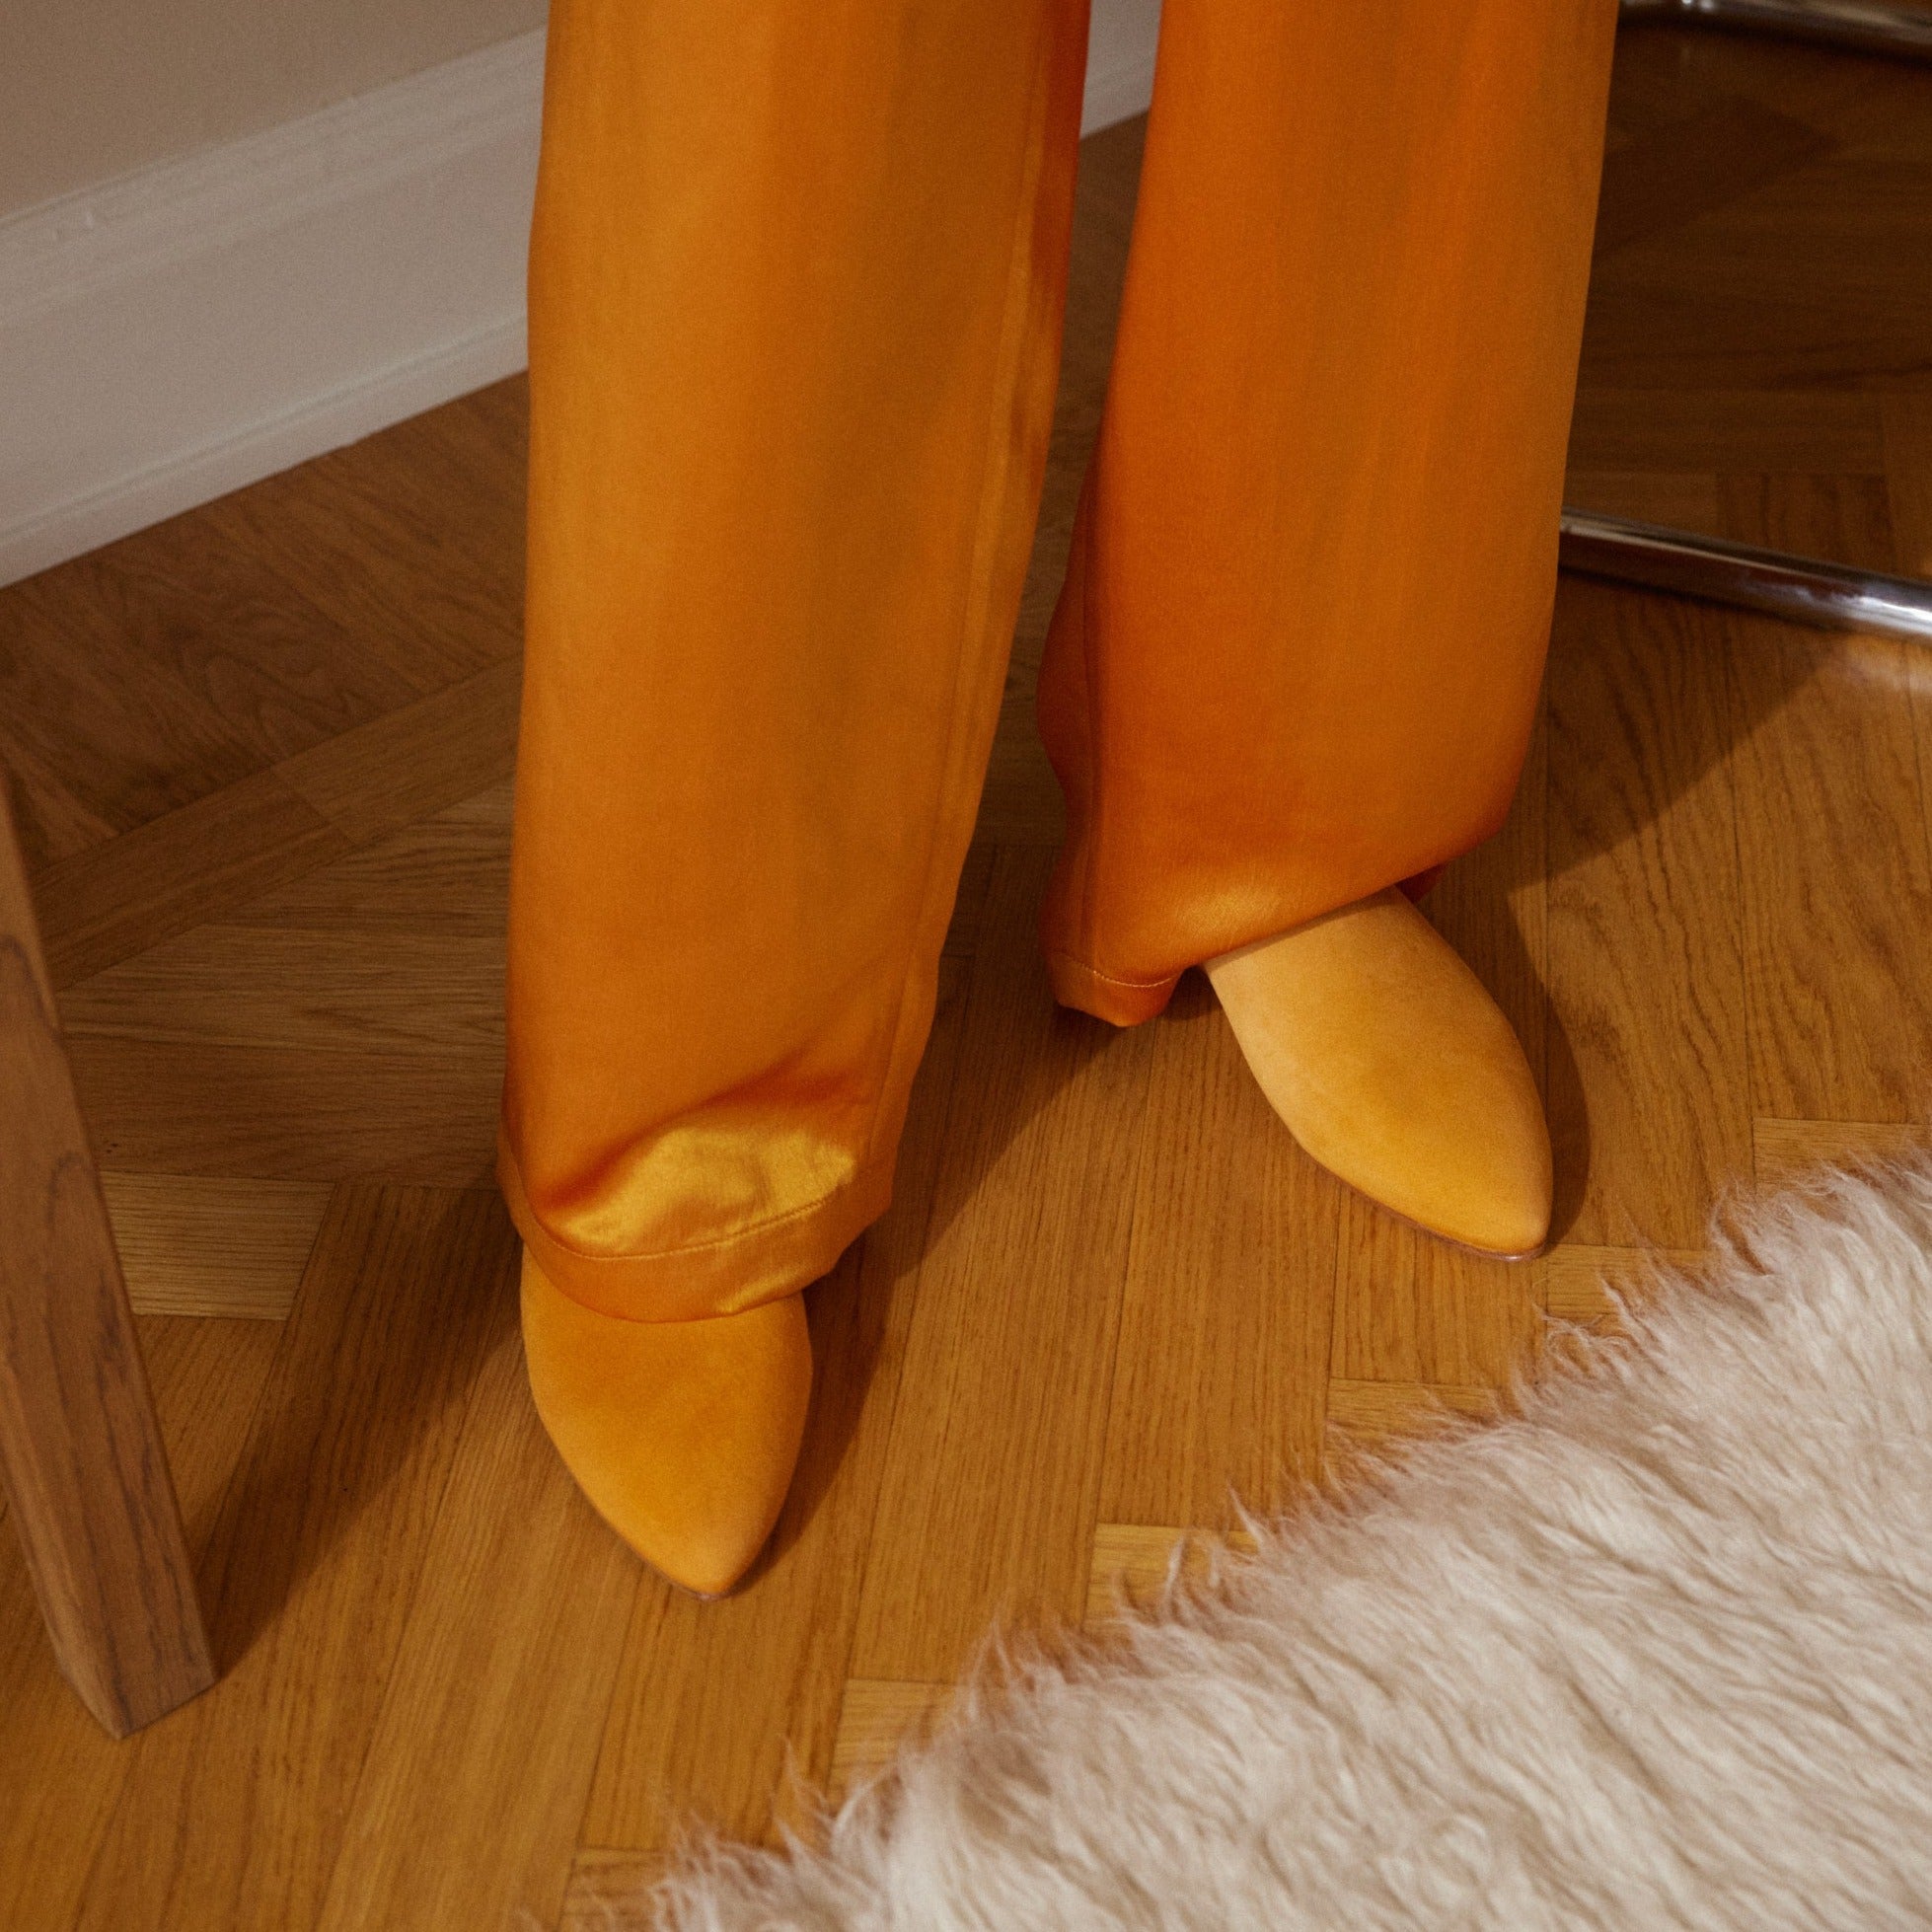 Inabo Women's Slider slipper in Saffron Suede worn by a women in orange satin pants standing on a wooden floor by a fluffy white rug